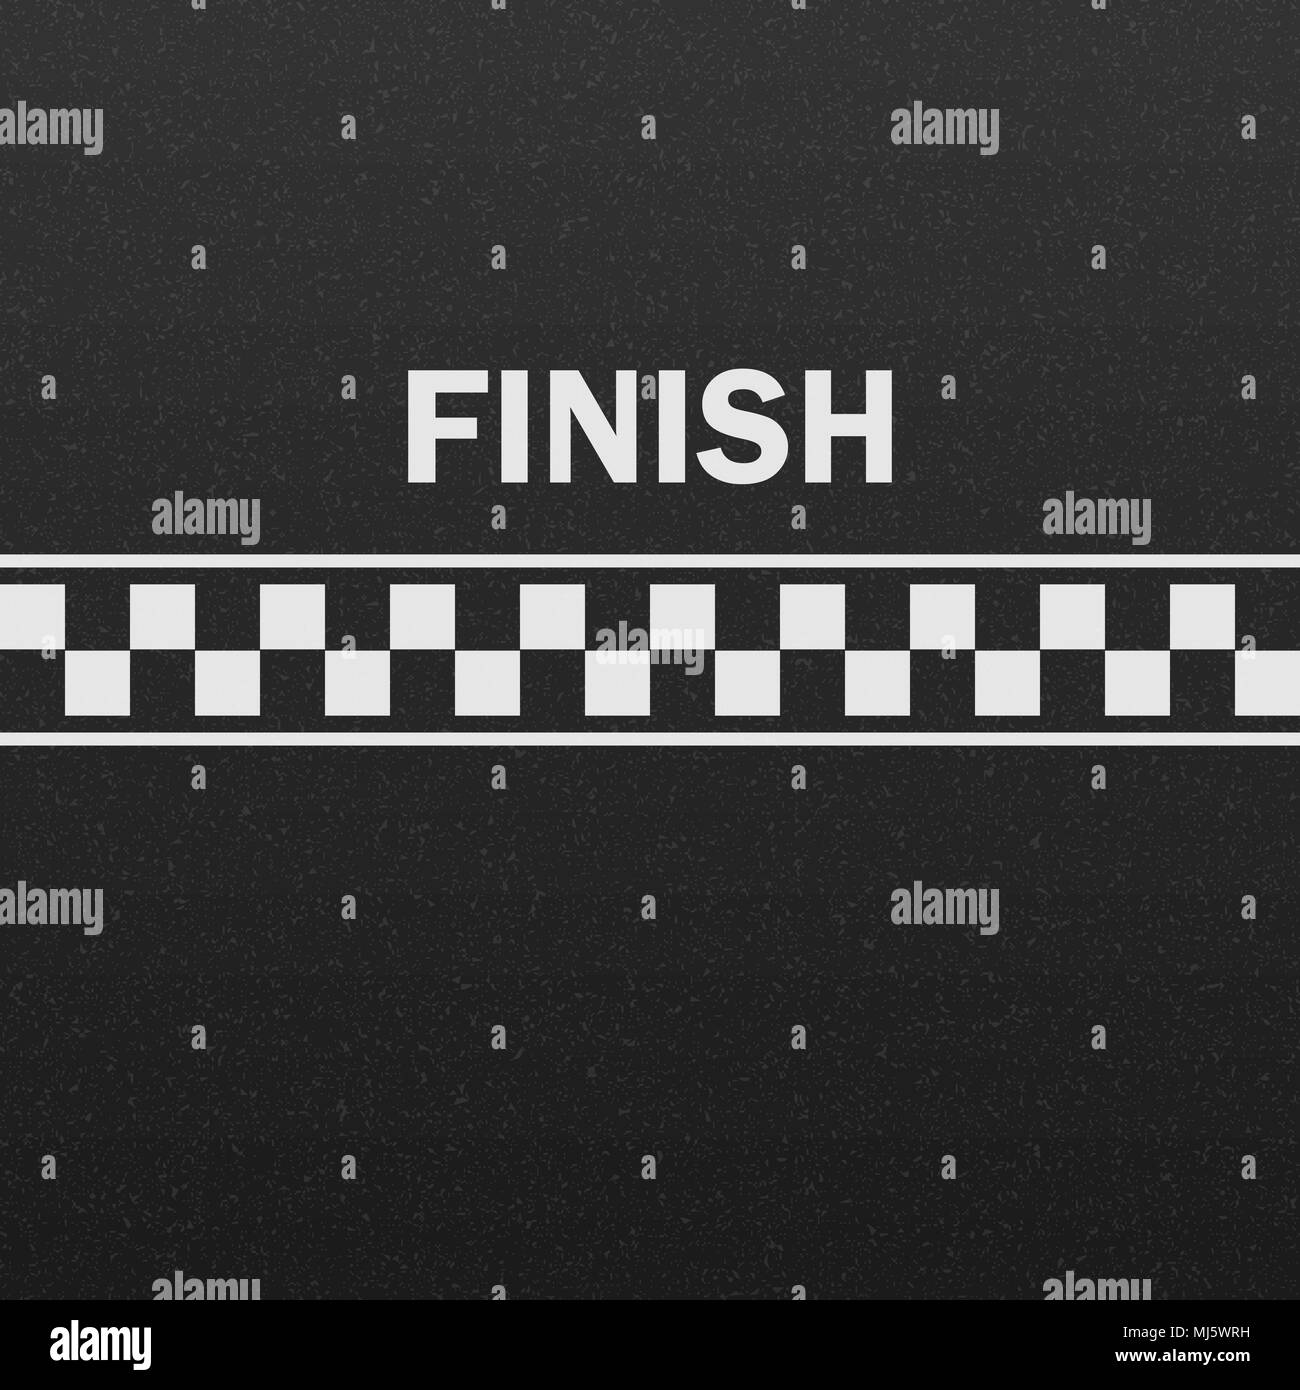 finish line race track background top view. Grunge textured on the asphalt road Stock Vector